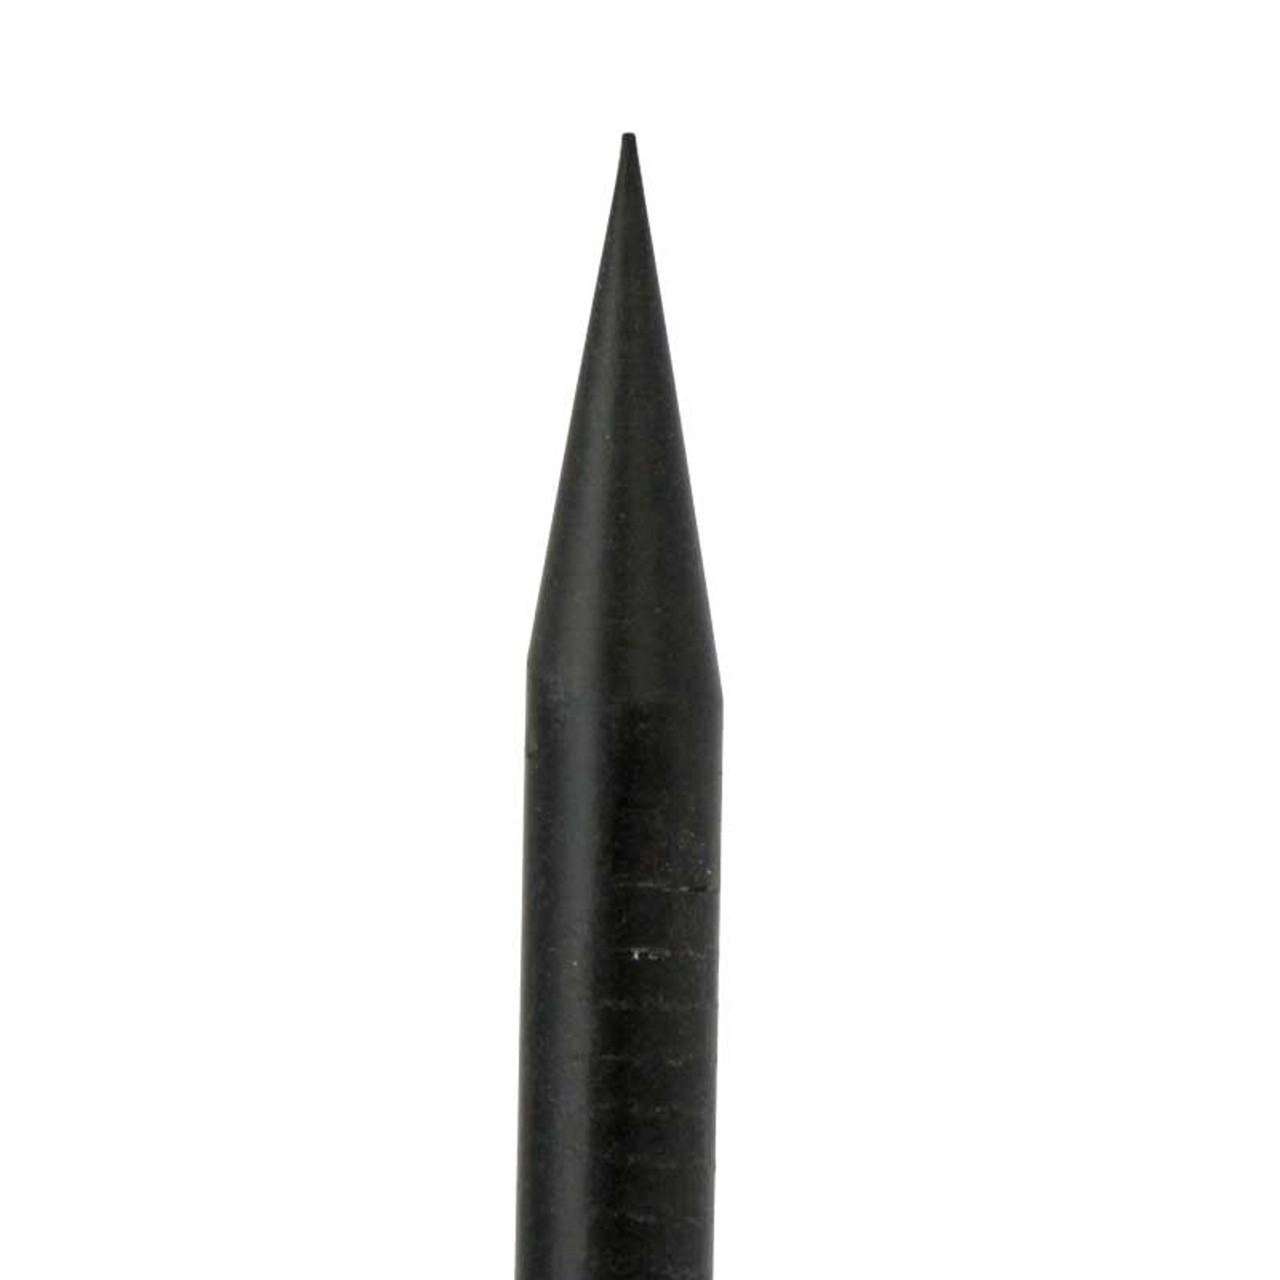 Plastic Stick with Beveled/ Pointed Ends